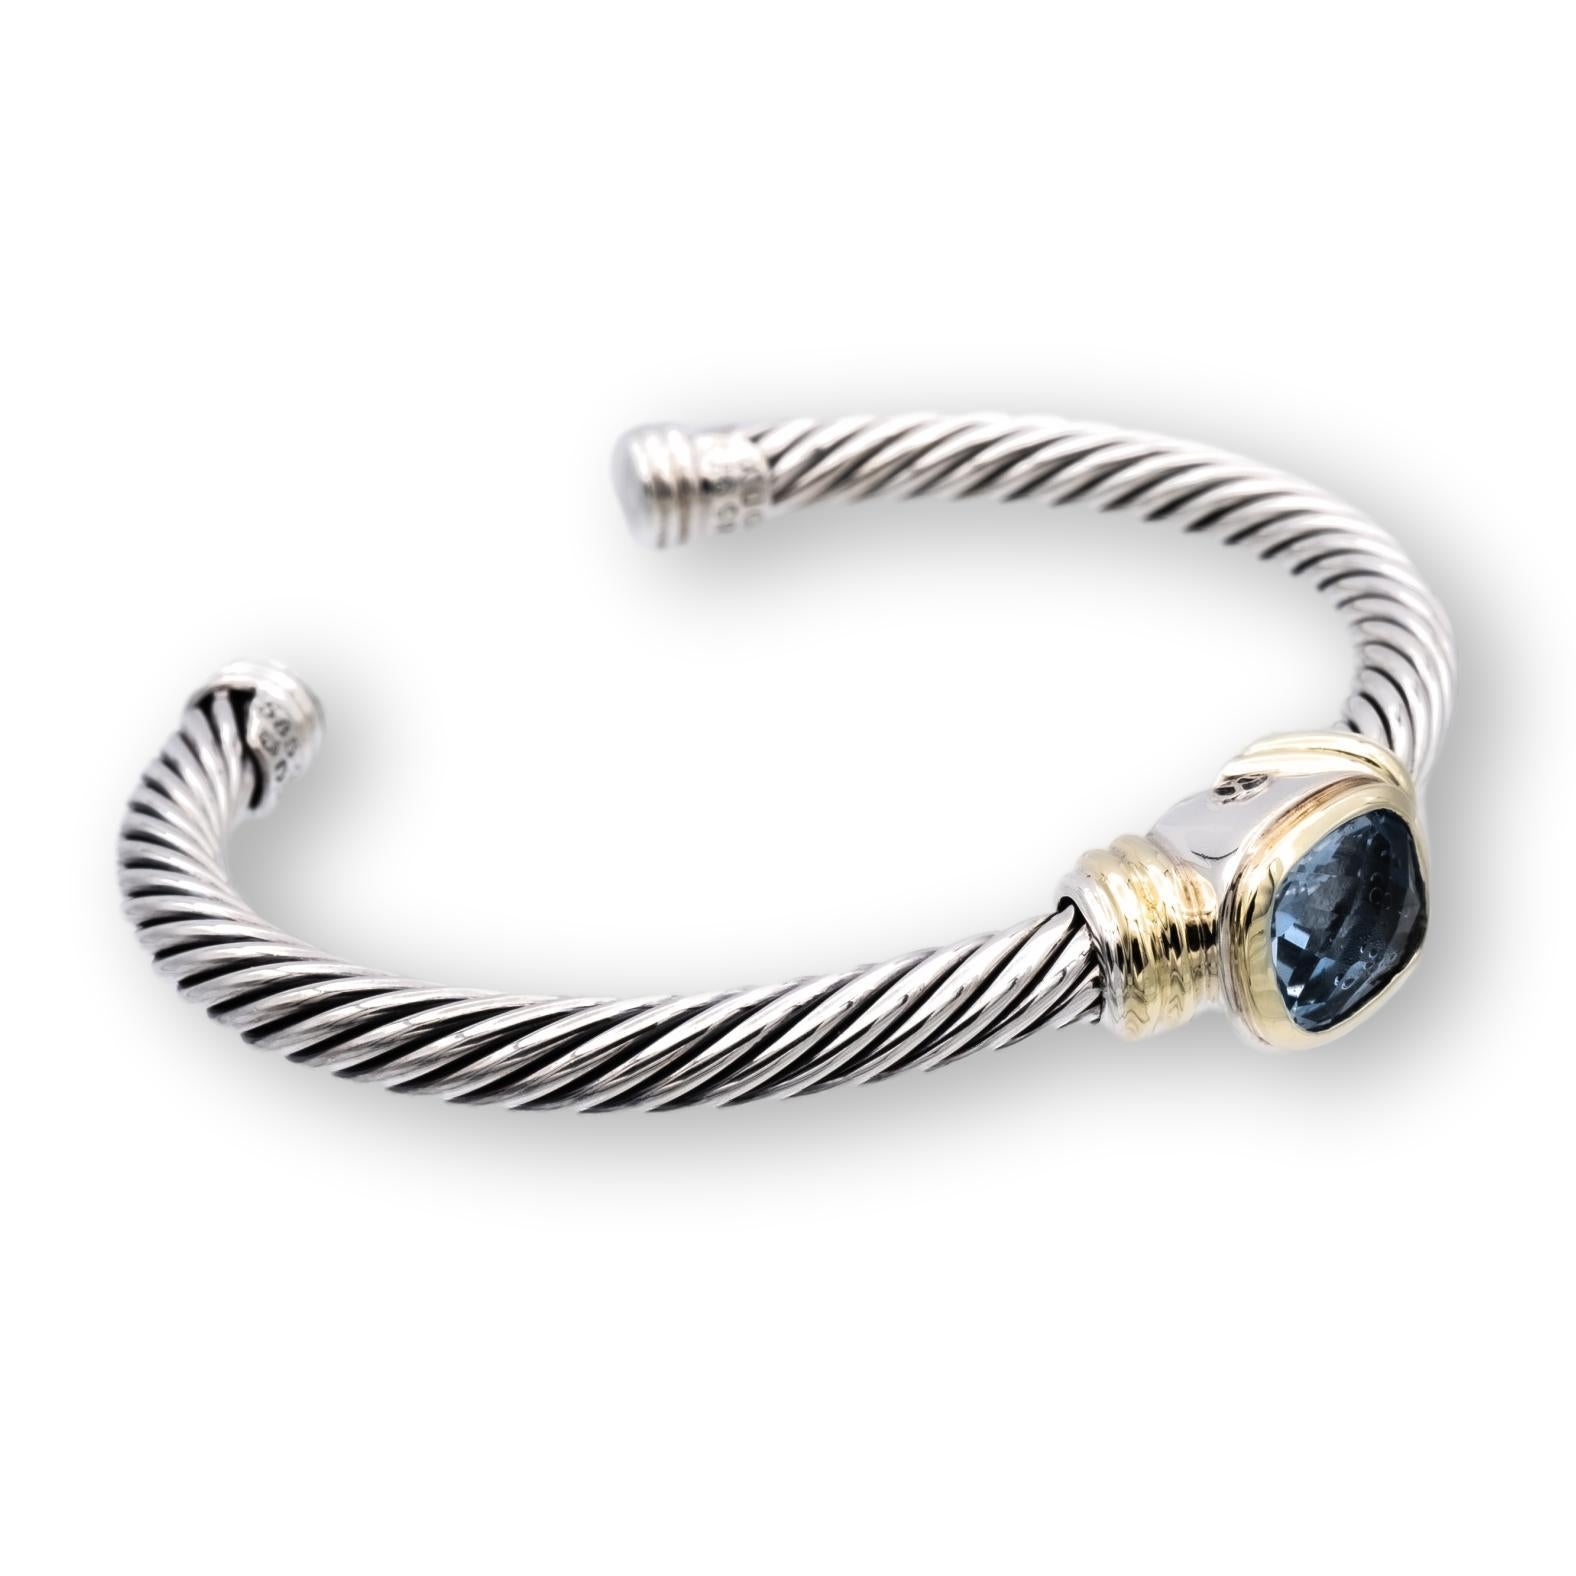 David Yurman open cuff bracelet from the Noblesse collection finely crafted in sterling silver featuring a medium deep blue topaz cushion cut center set in 14 karat yellow gold bezel. Bracelet measures 5mm wide and fits wrists up to 6.25